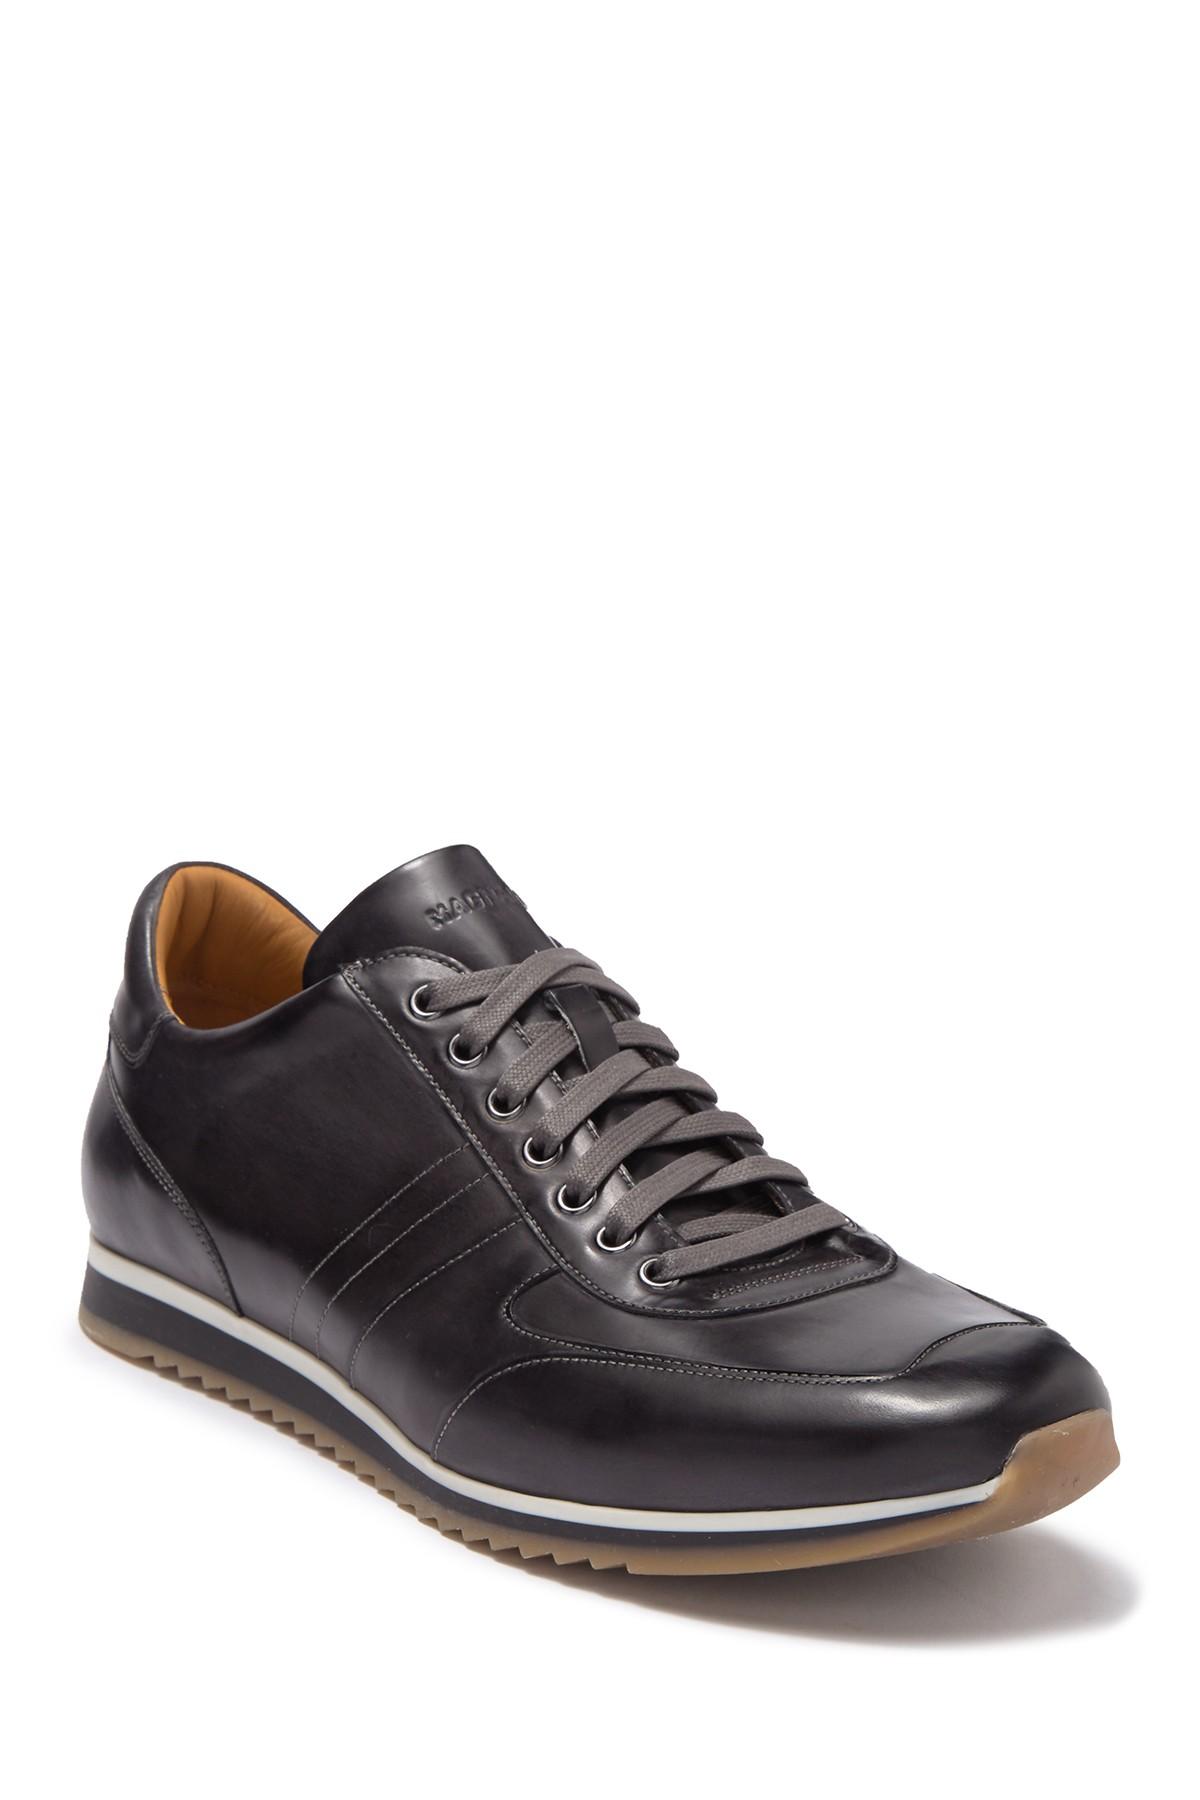 Magnanni Berkeley Leather Sneaker in Grey (Gray) for Men - Lyst